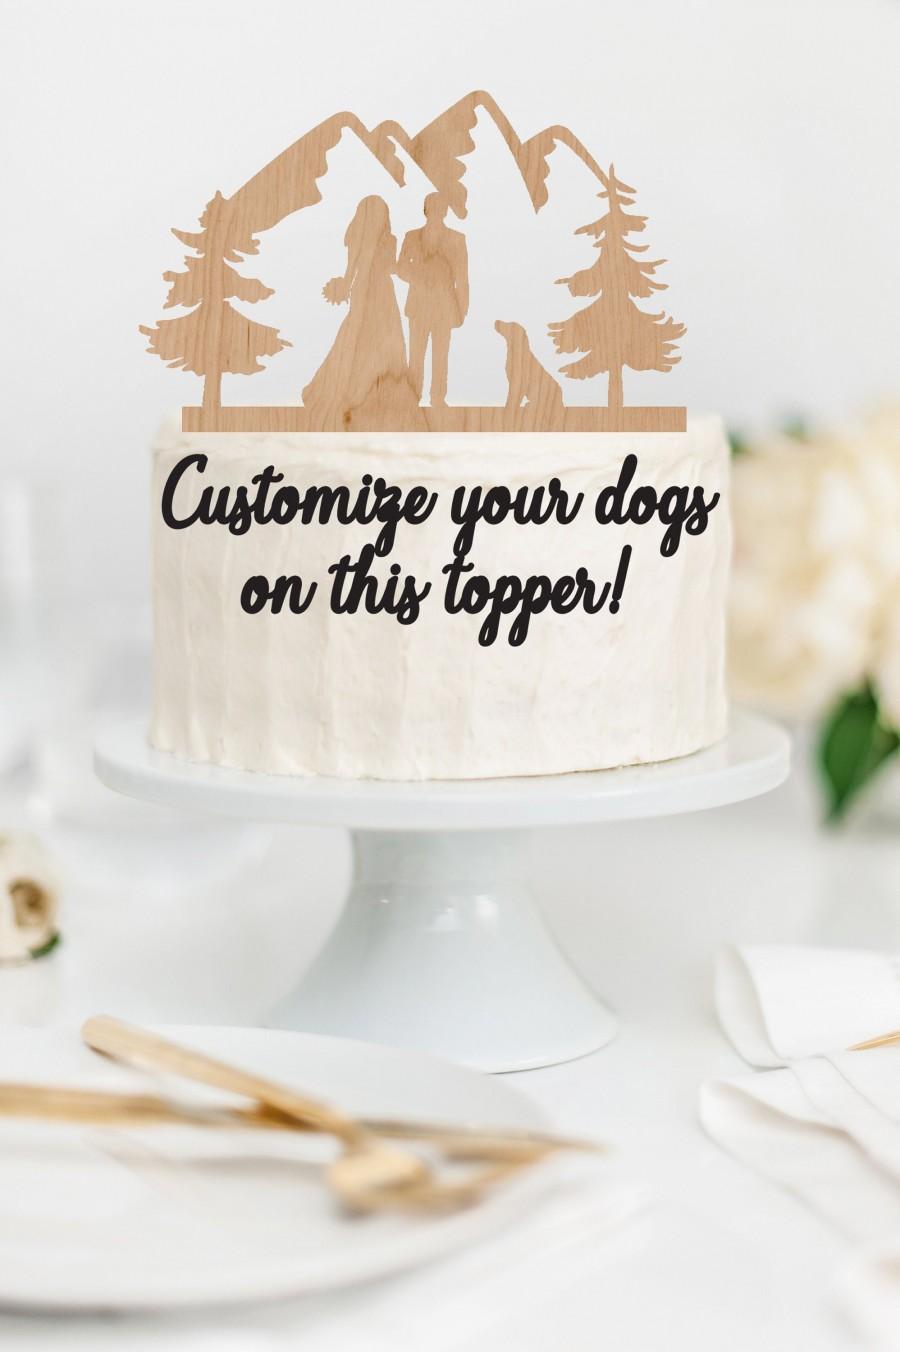 Mariage - BRIDE GROOM Couple with DOG or Dogs Wood Mountain Wedding Cake Topper / Mountain outdoor bride groom cake topper / Wedding cake topper